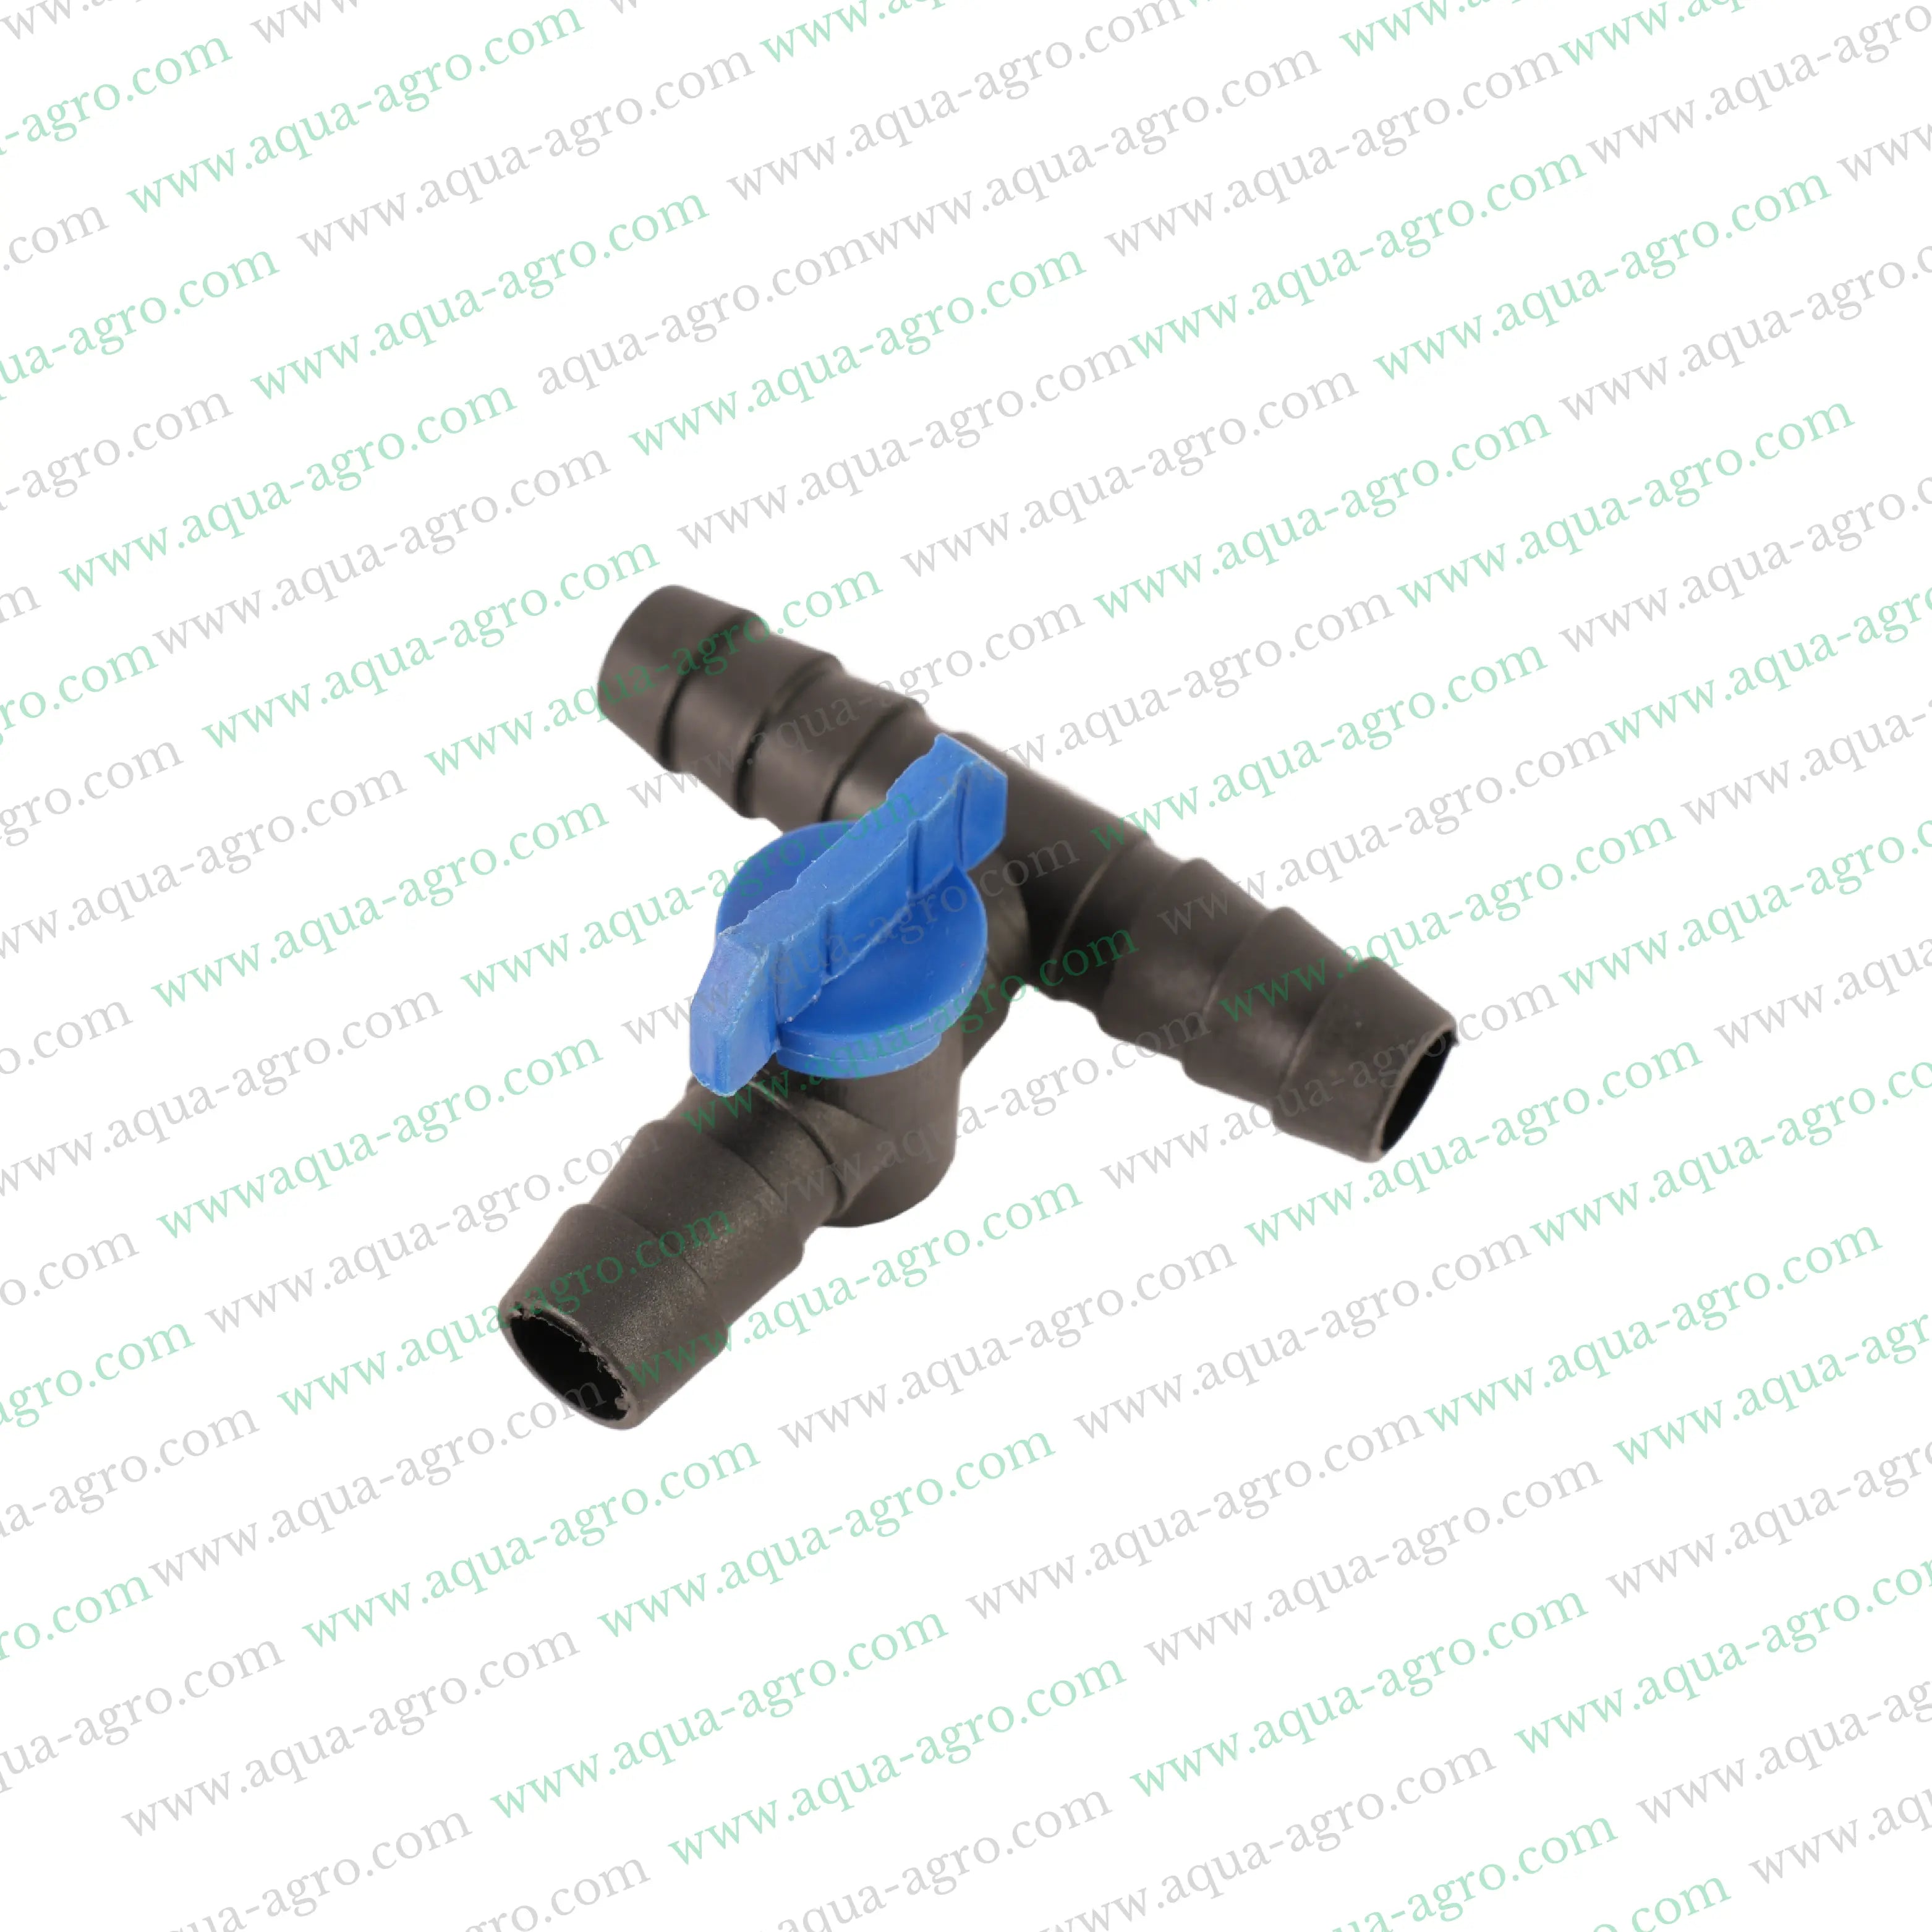 AQUA - AGRO | Drip Fittings And Accessories - Barbed Fittings - Lite - Drip Tee tap - 16mm